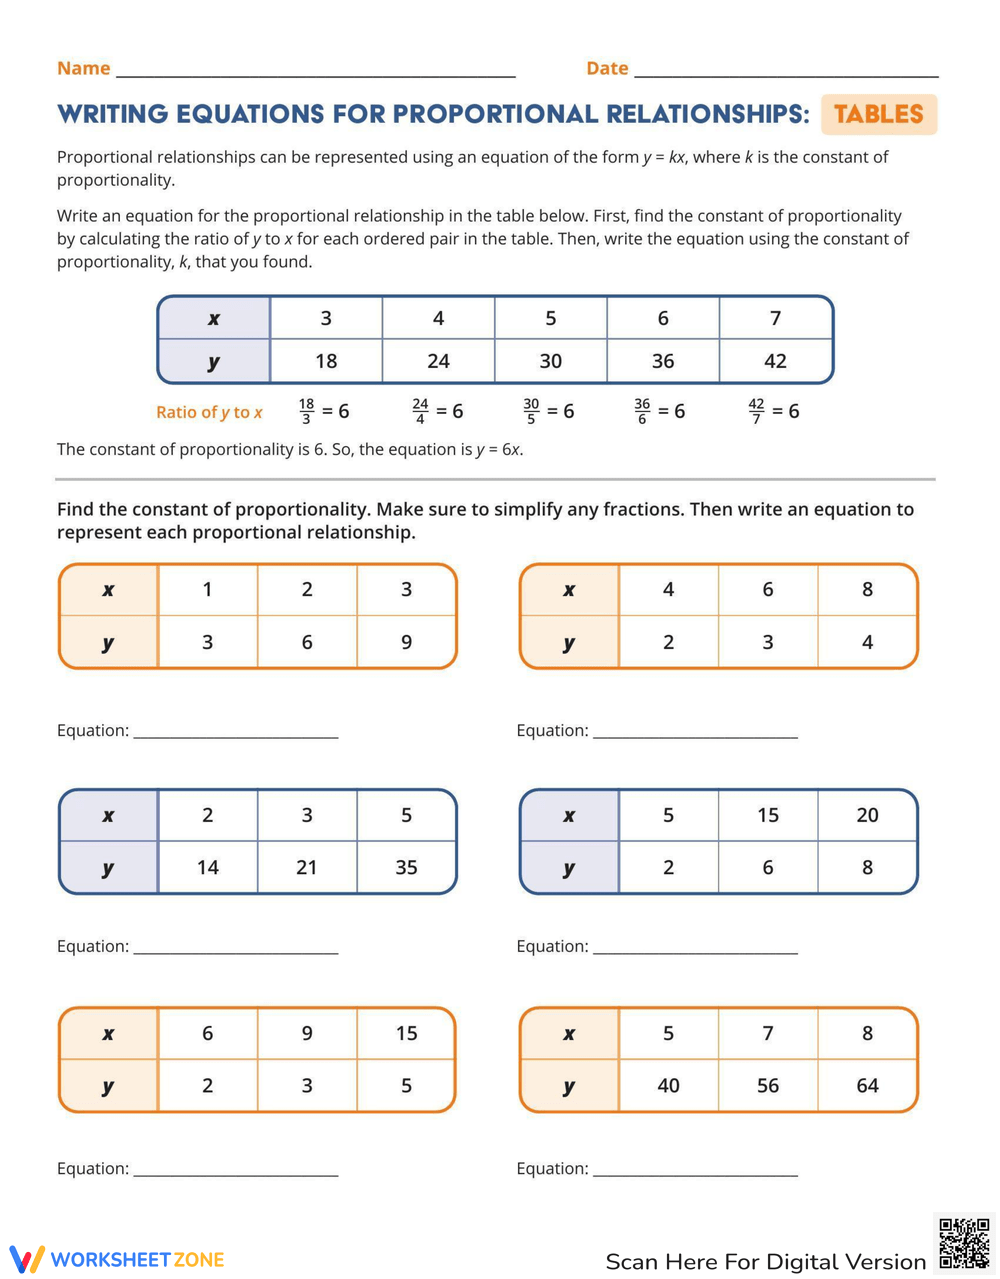 Writing Equations for Proportional Relationships: Tables